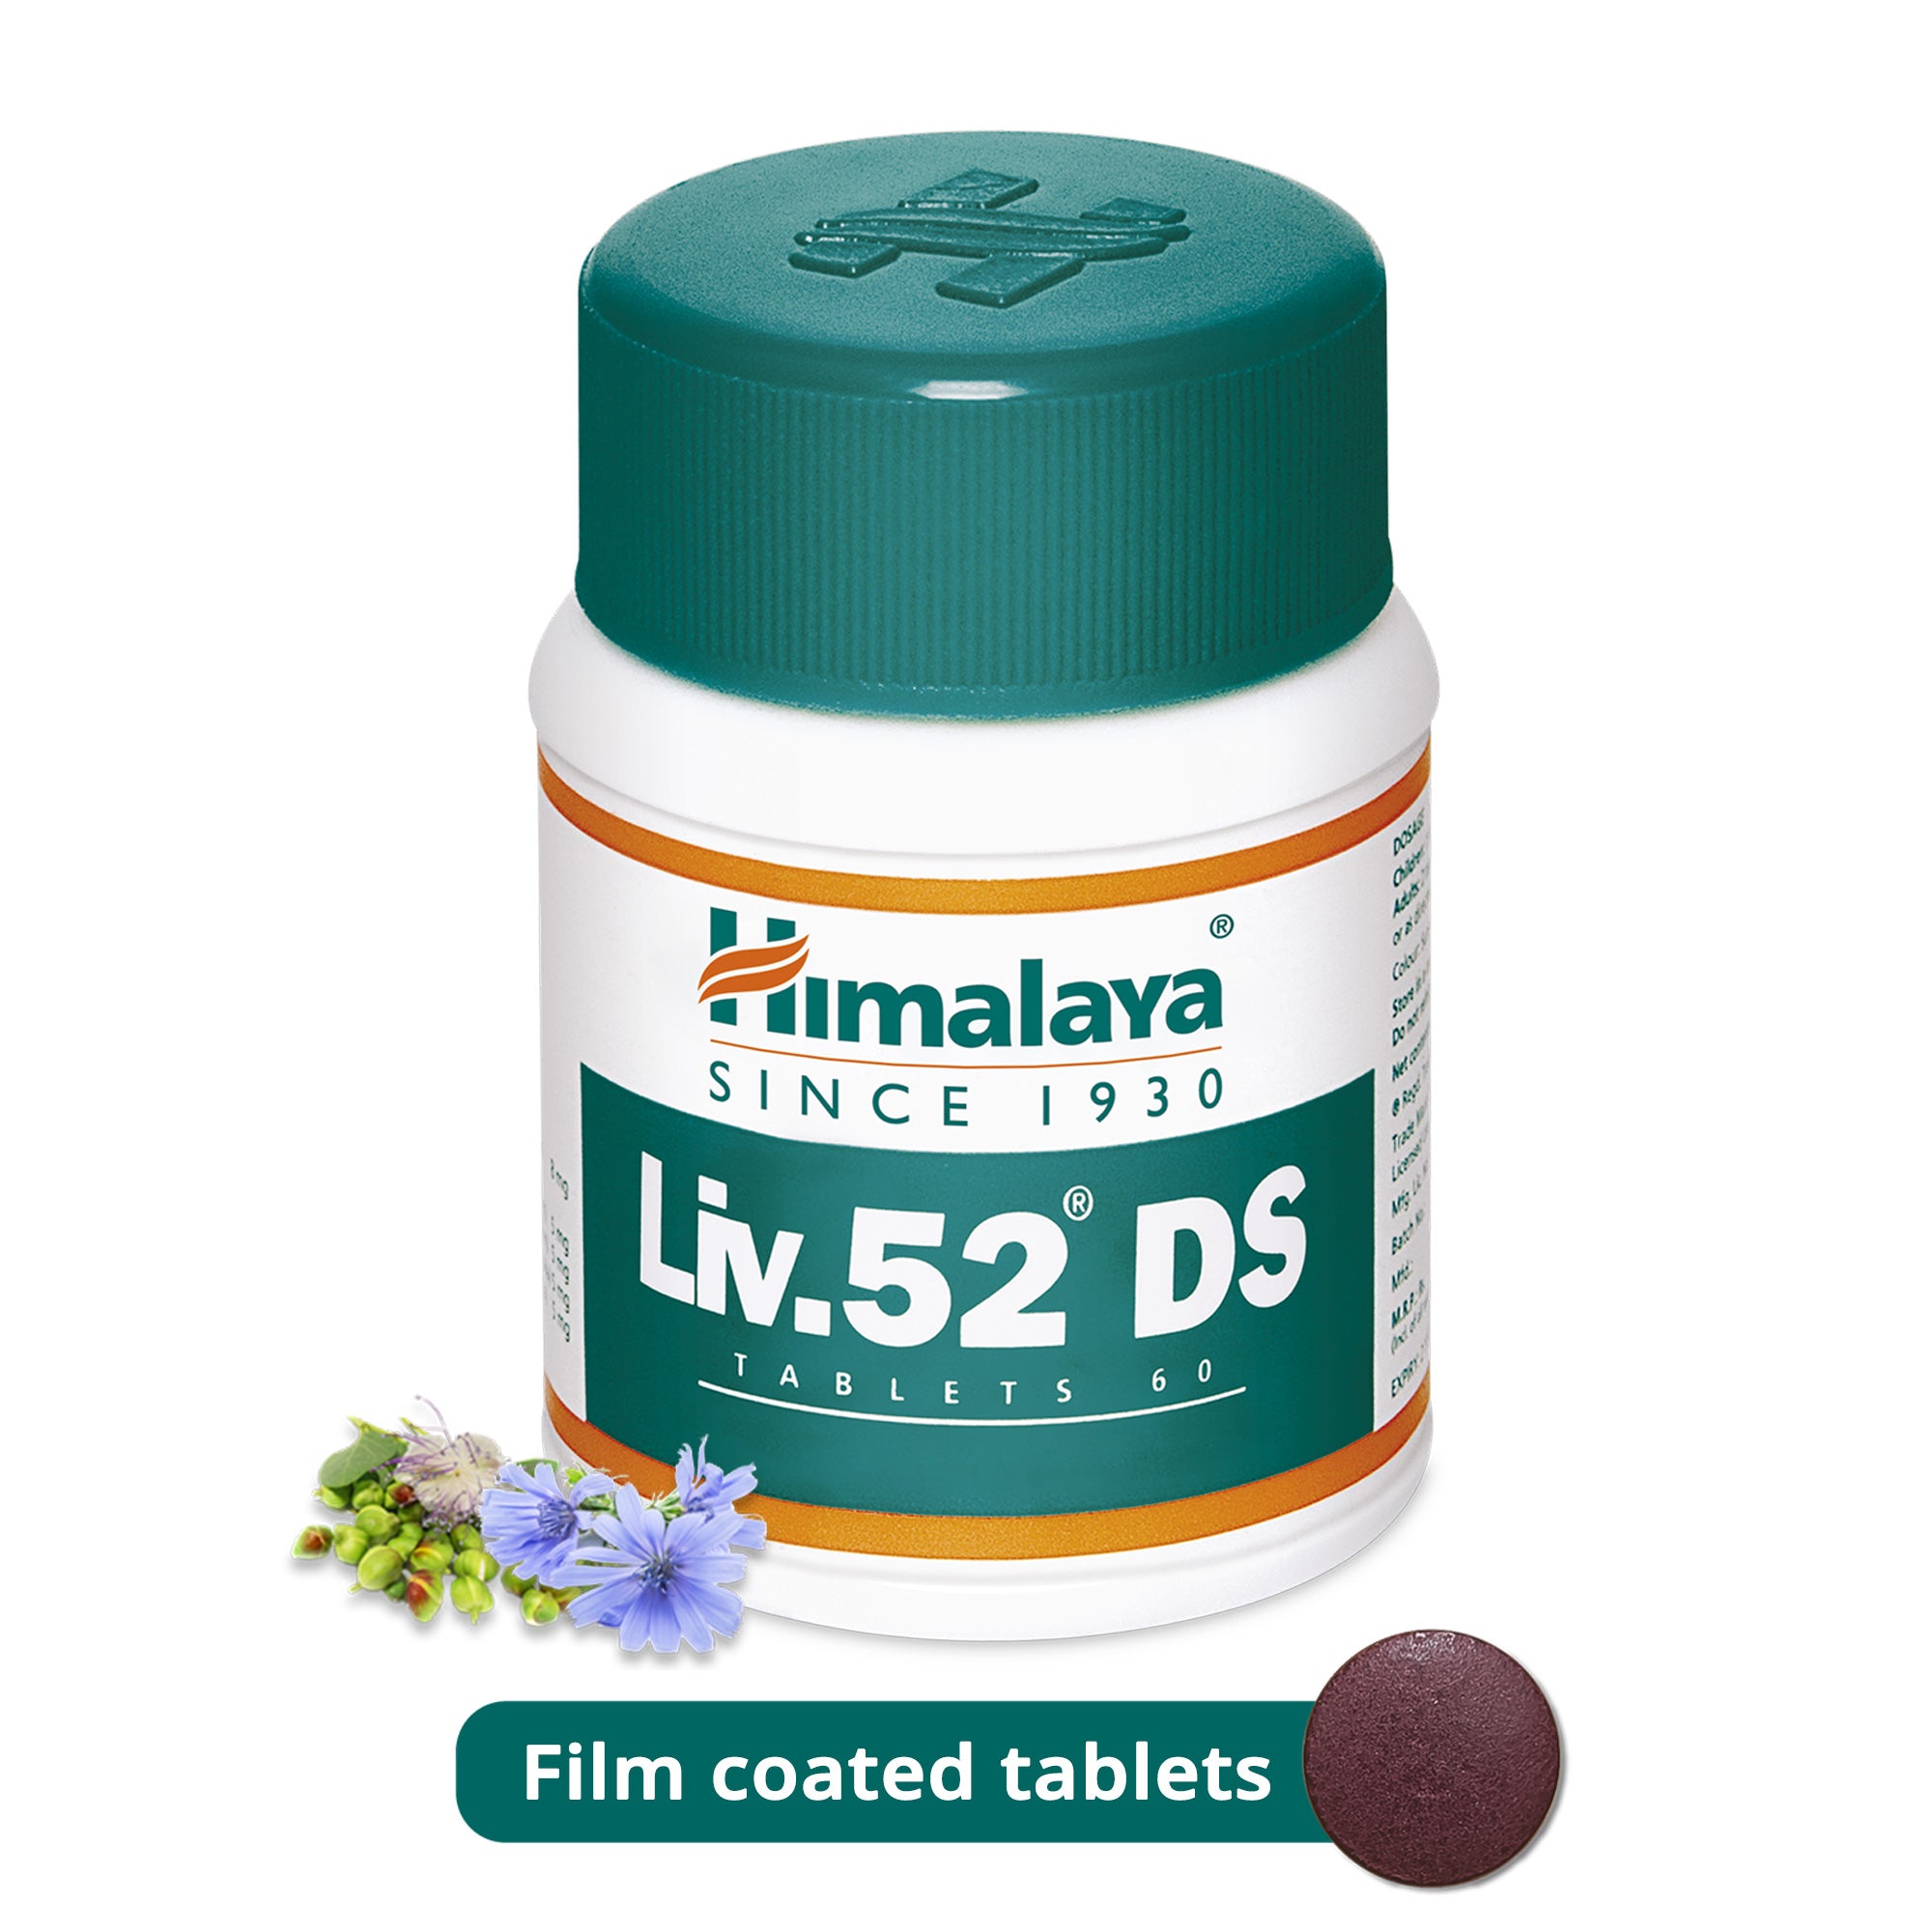 Himalaya Liv 52: Uses, Side Effects, Price & Substitutes